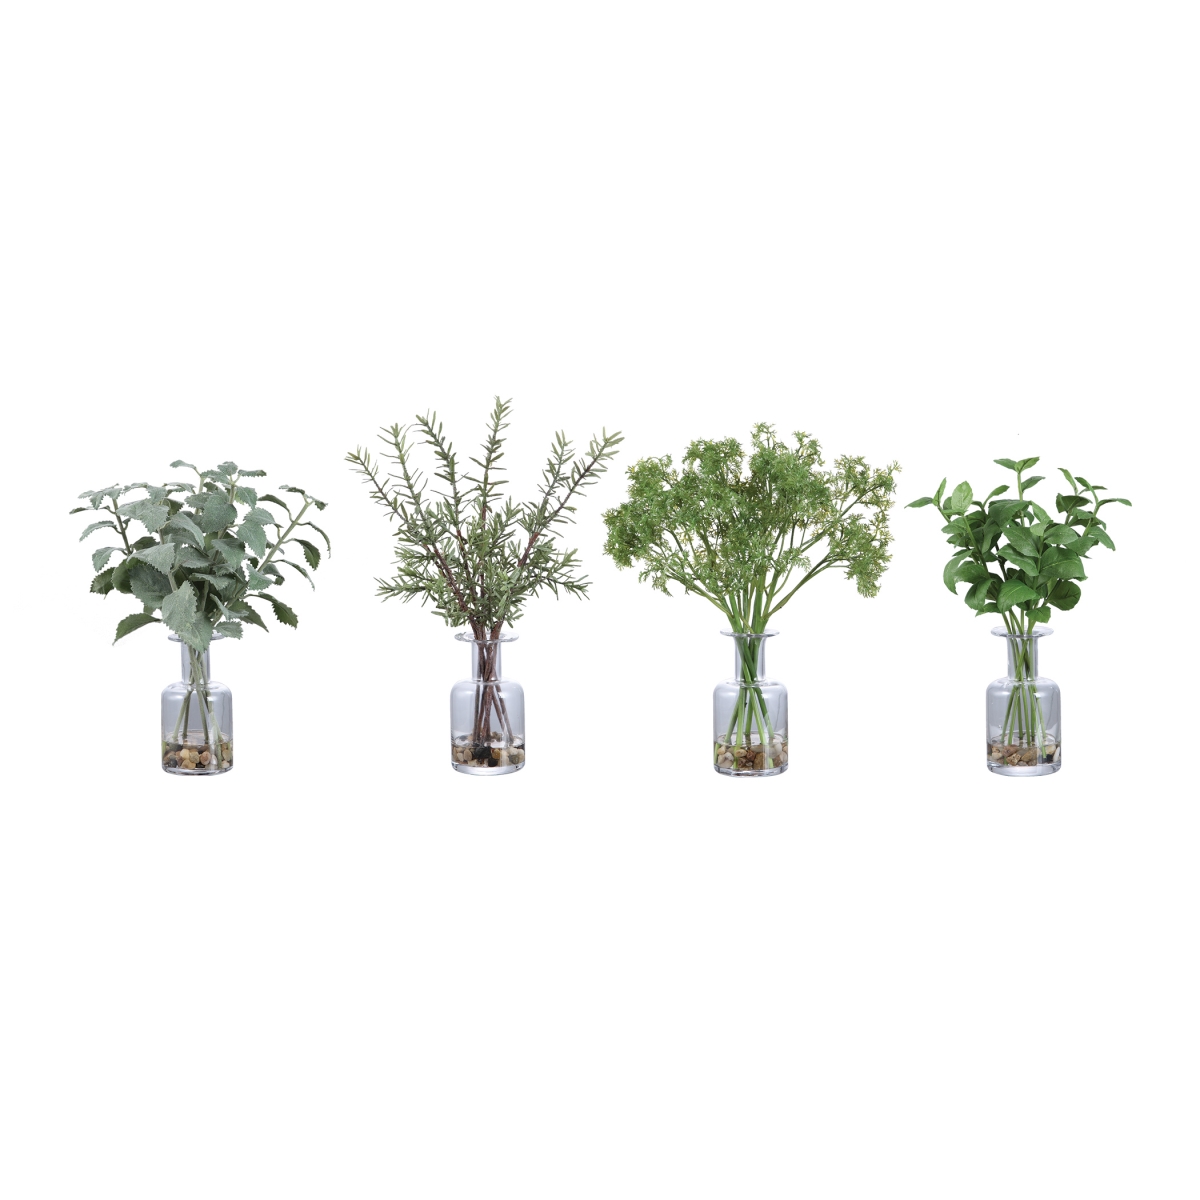 Picture of 212 Main 60148 Ceci Kitchen Herbs - Set of 4